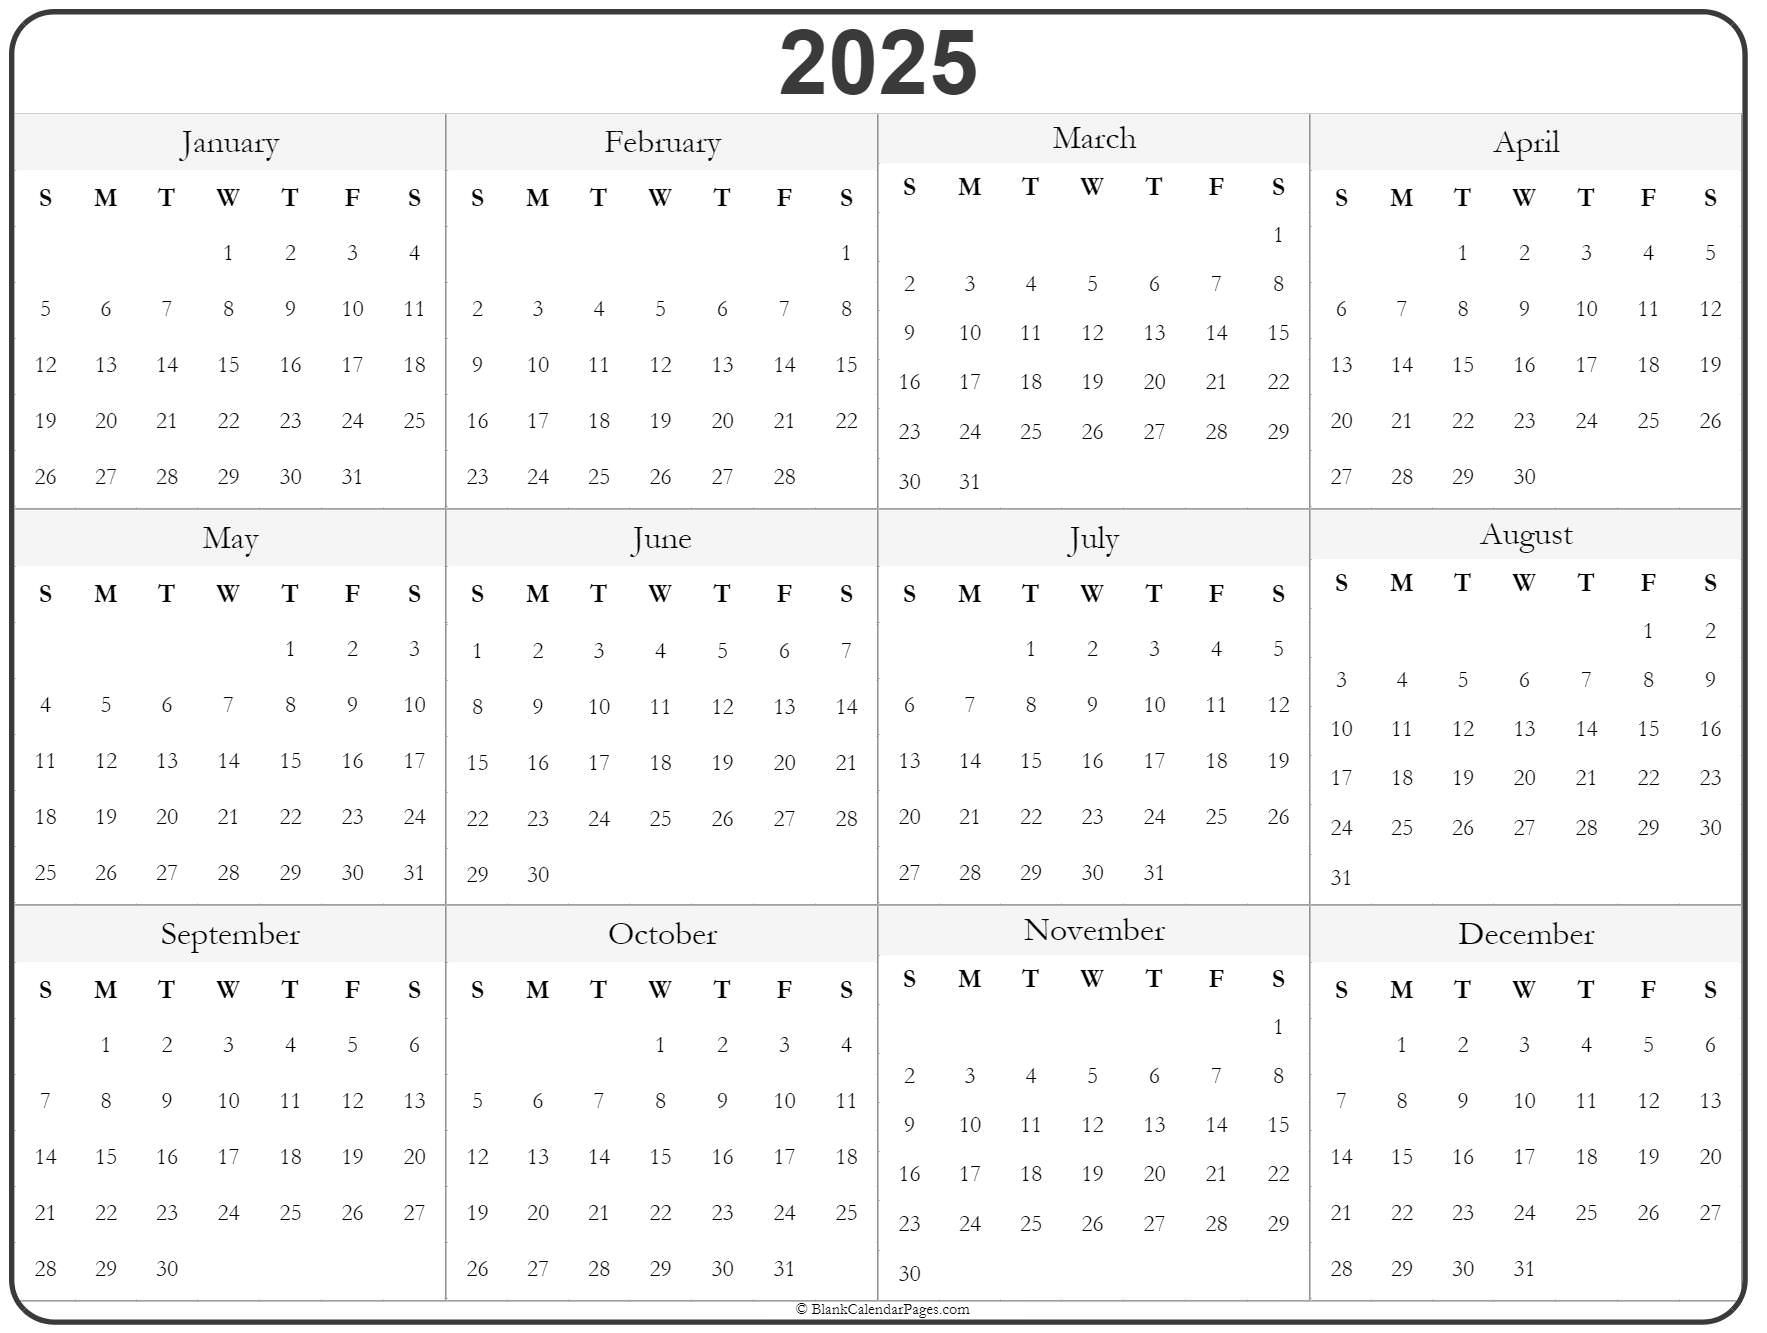 st-johns-county-schools-calendar-with-holidays-2022-2023